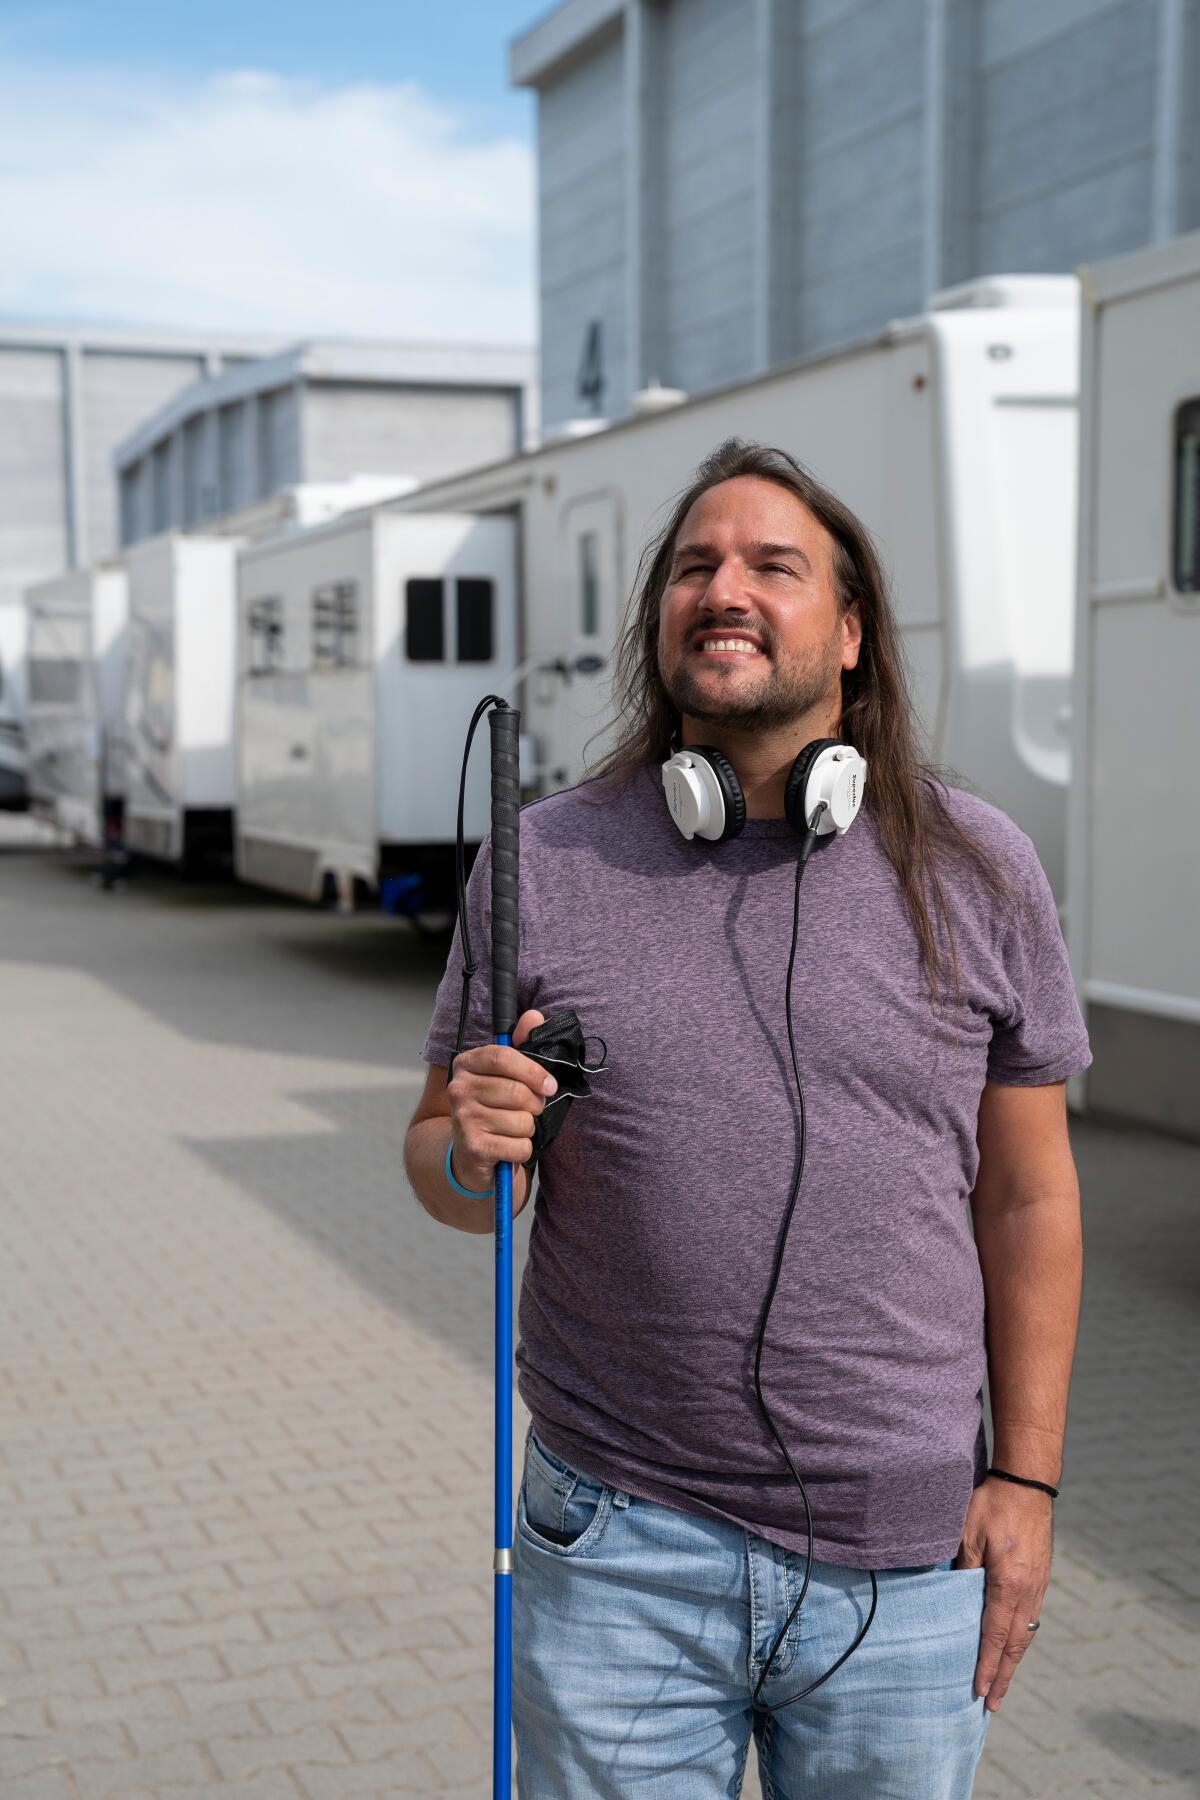 Joe Strechay stands in front of some trailers in a purple shirt and jeans with headphones around his neck and a cane in hand.